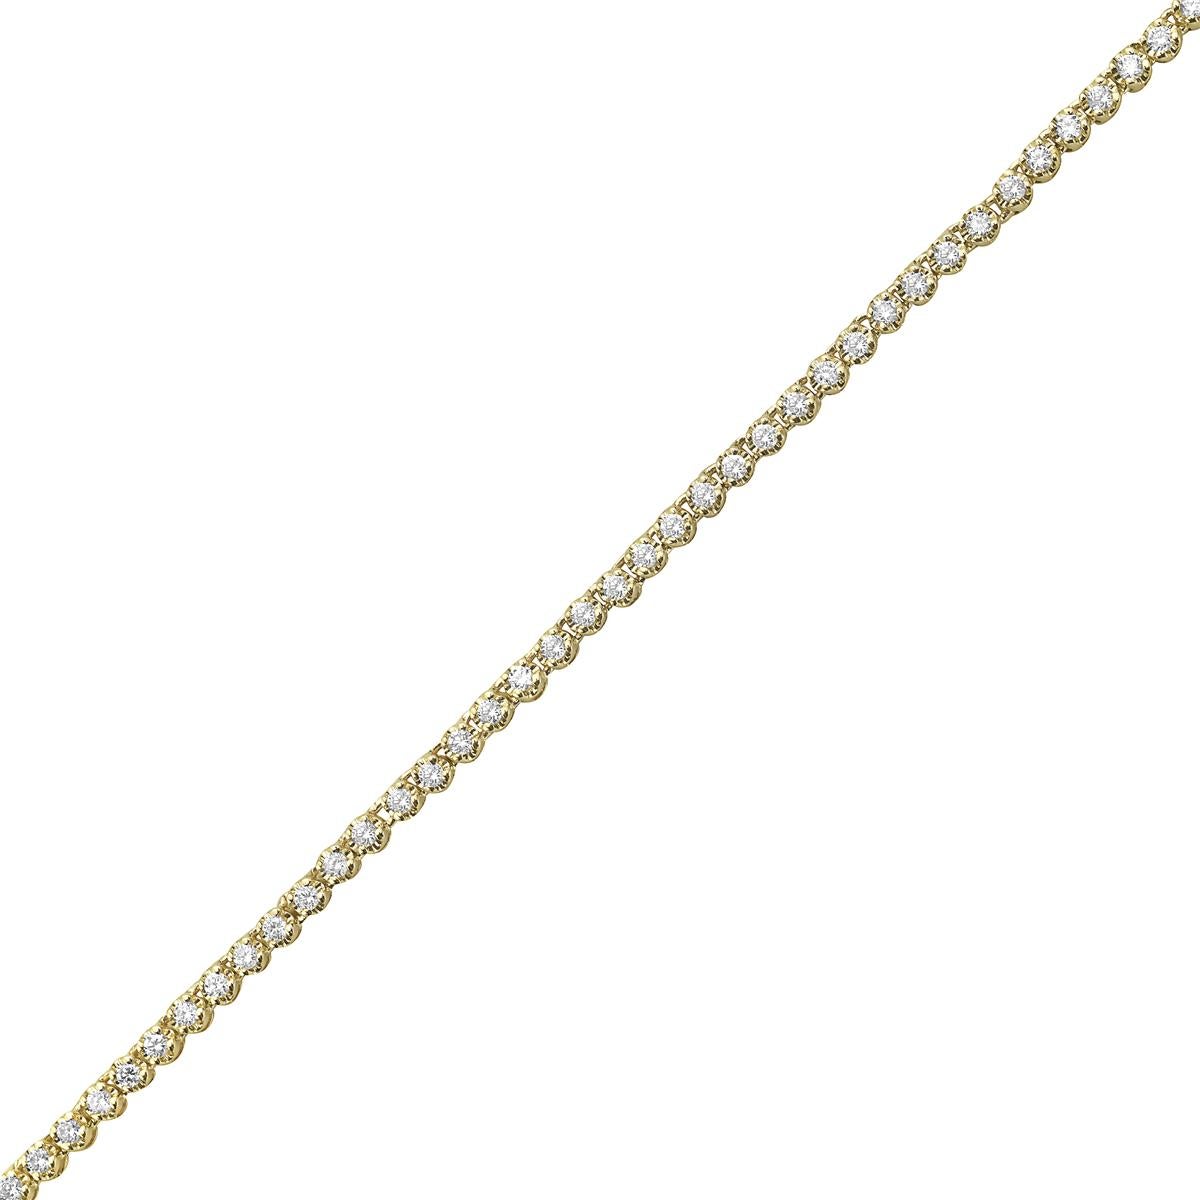 Exquisite Vivid Diamonds Straight Line diamond tennis necklace crafted in 14K Yellow Gold, showcasing 192 round brilliant cut diamonds weighing 1.96 carats, GH color, SI1-SI2 Clarity. Each diamond was carefully selected, perfectly matched and set in